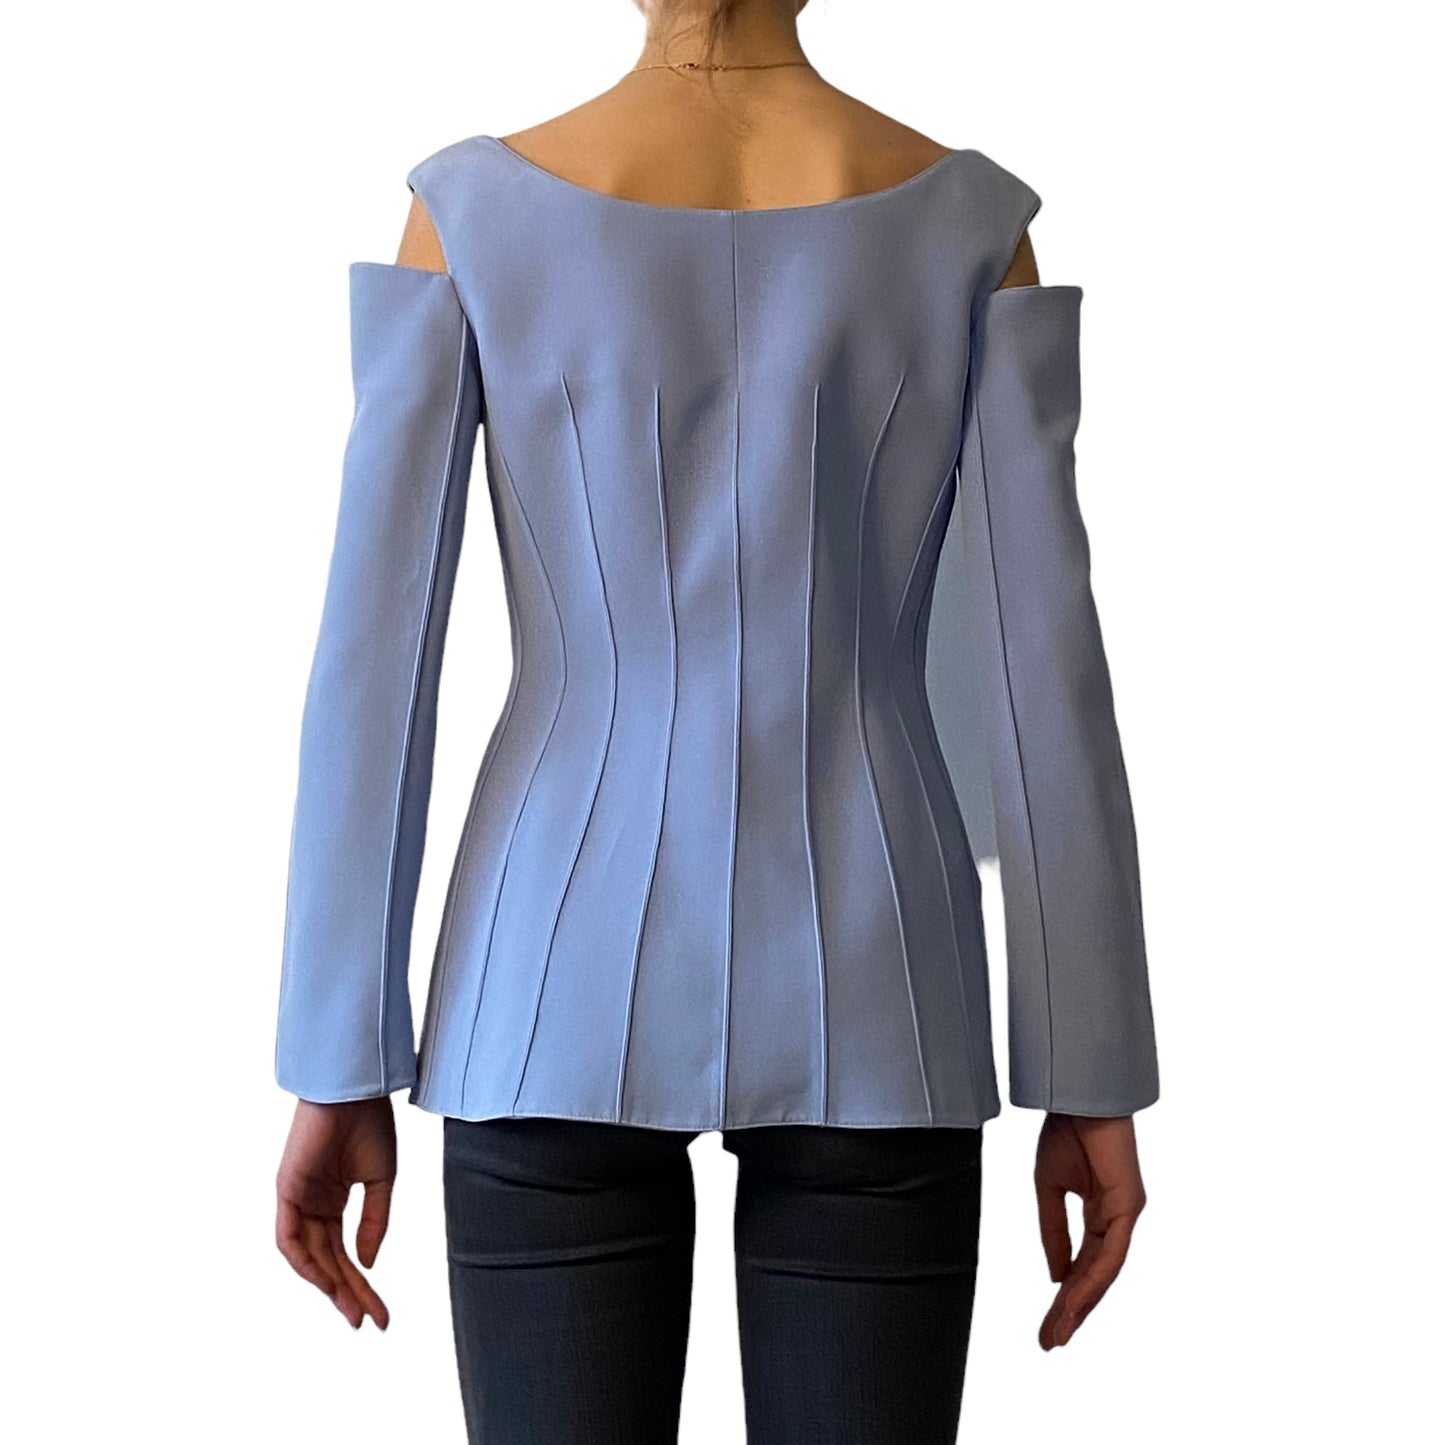 Thierry Mugler COUTURE vintage ensemble with shoulder cutouts in light blue - XS - 1990s